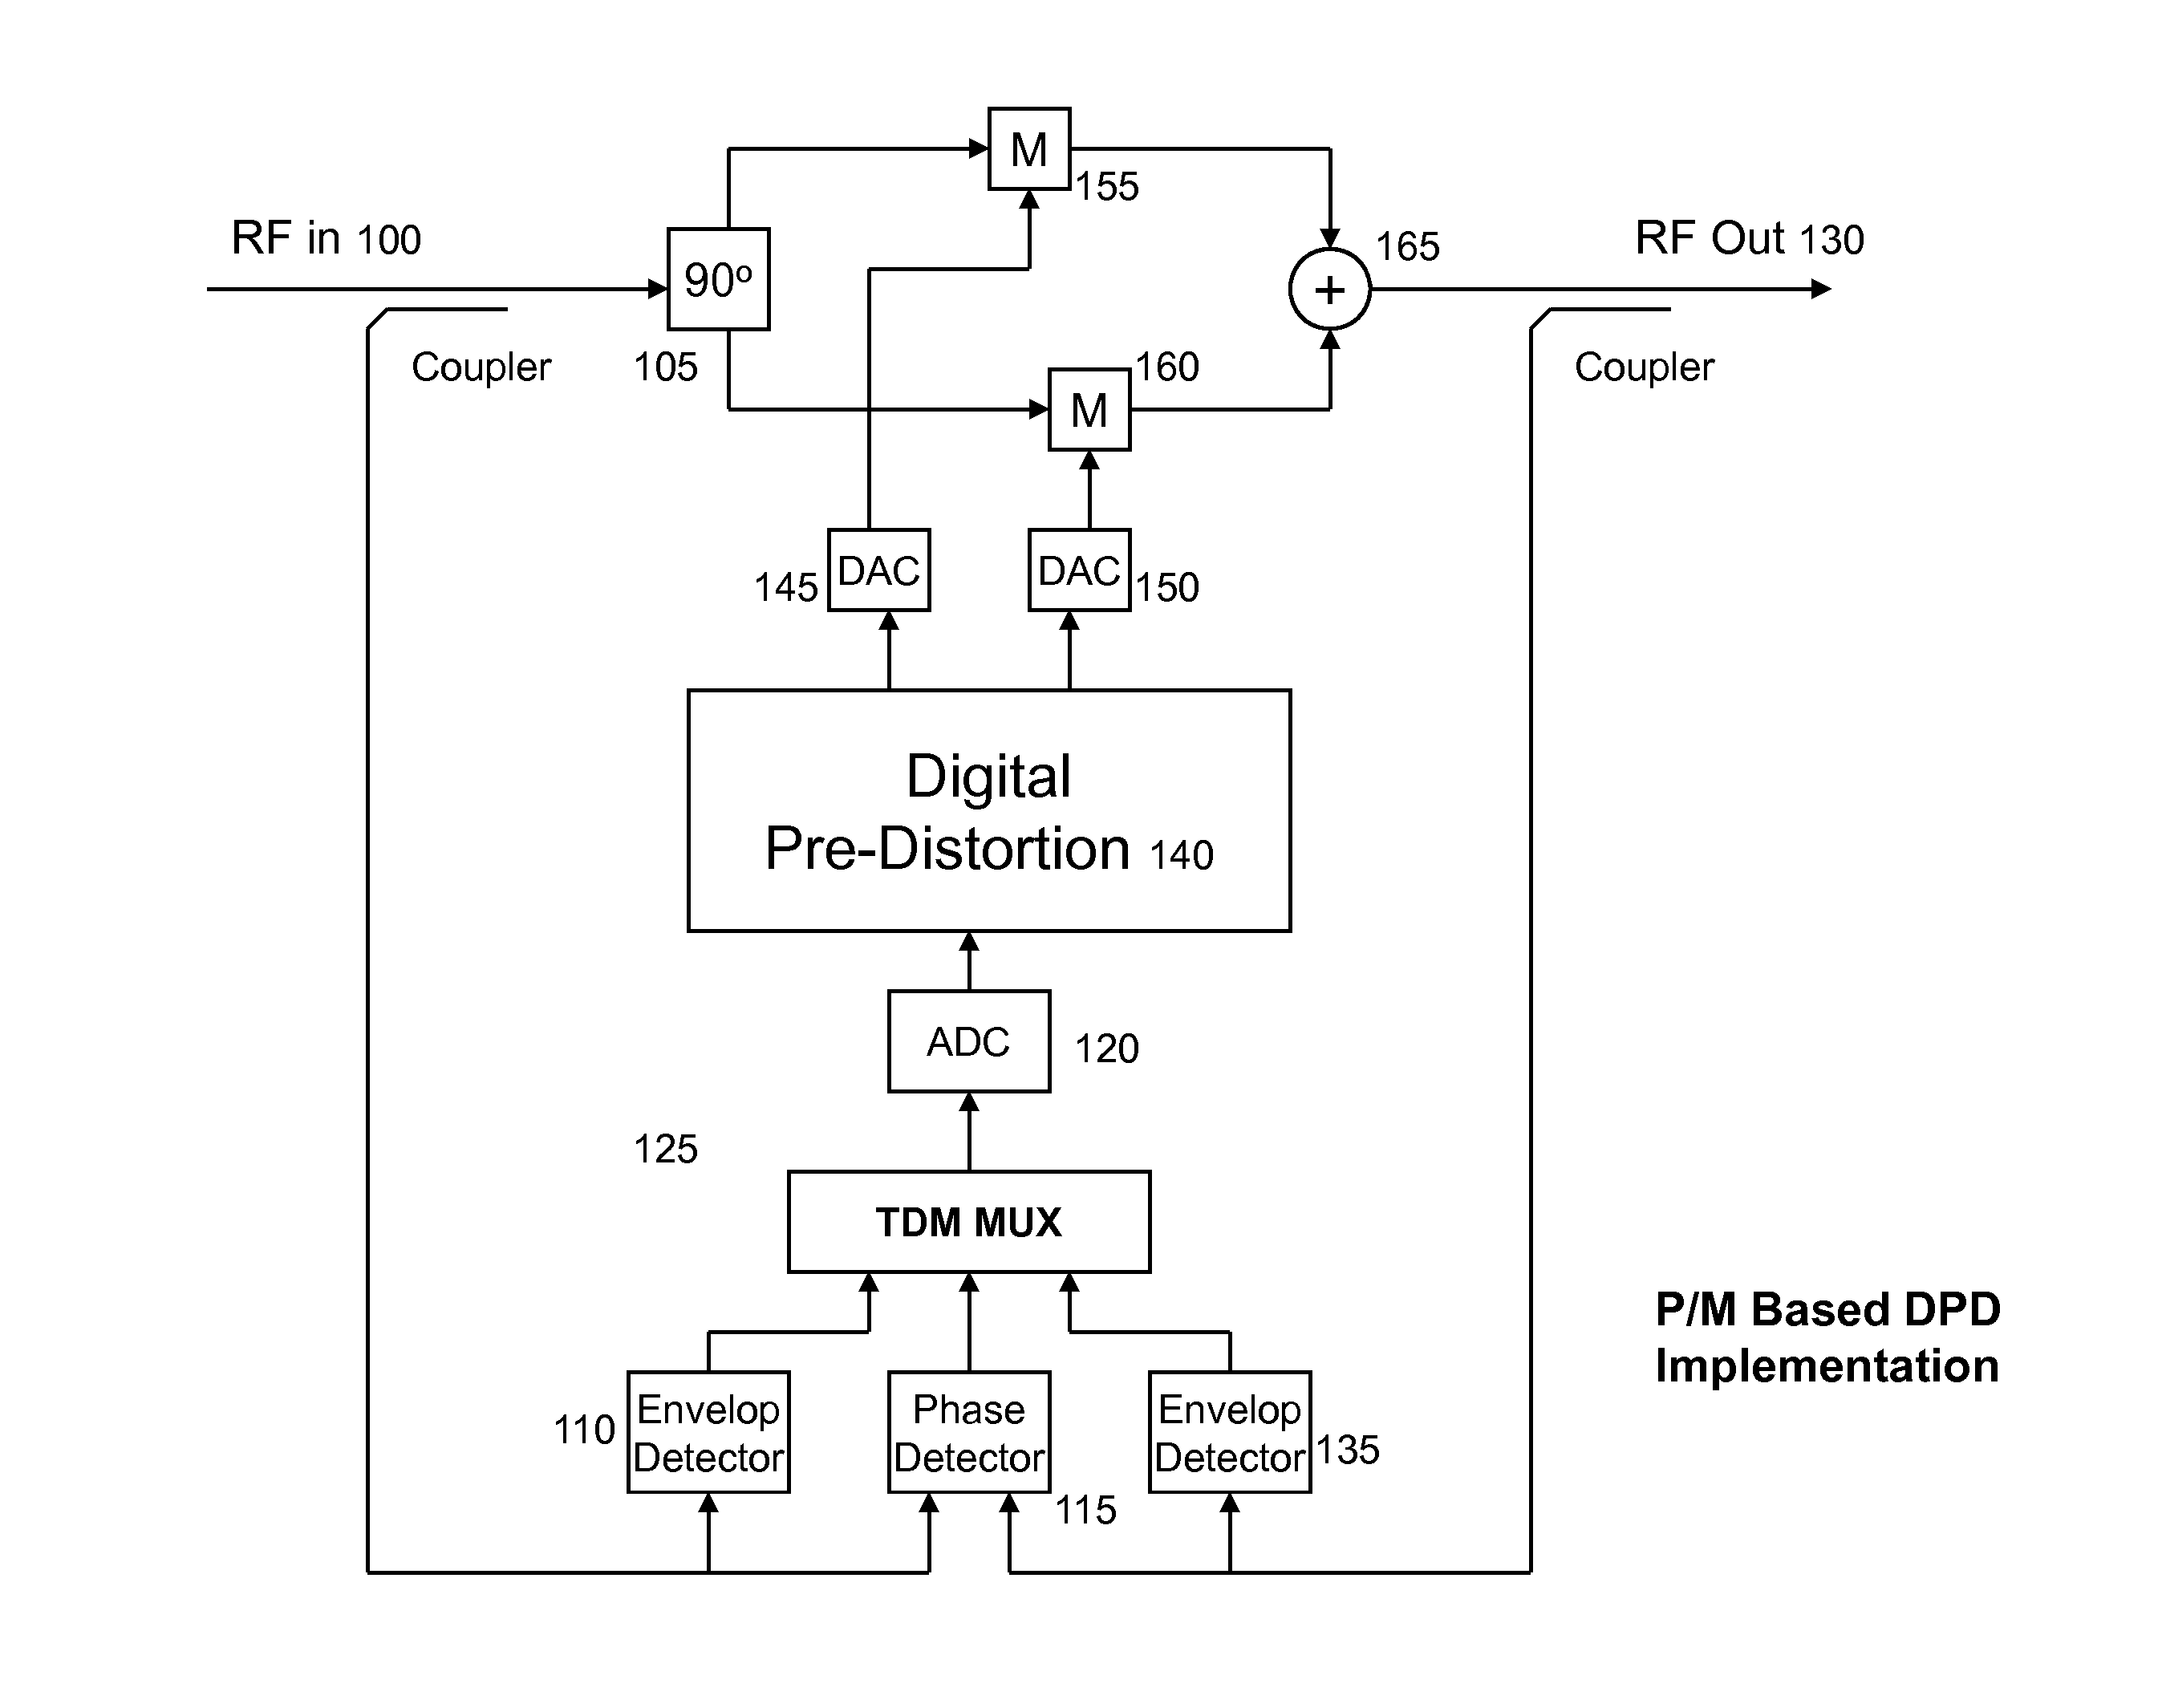 Power amplifier predistortion methods and apparatus using envelope and phase detector